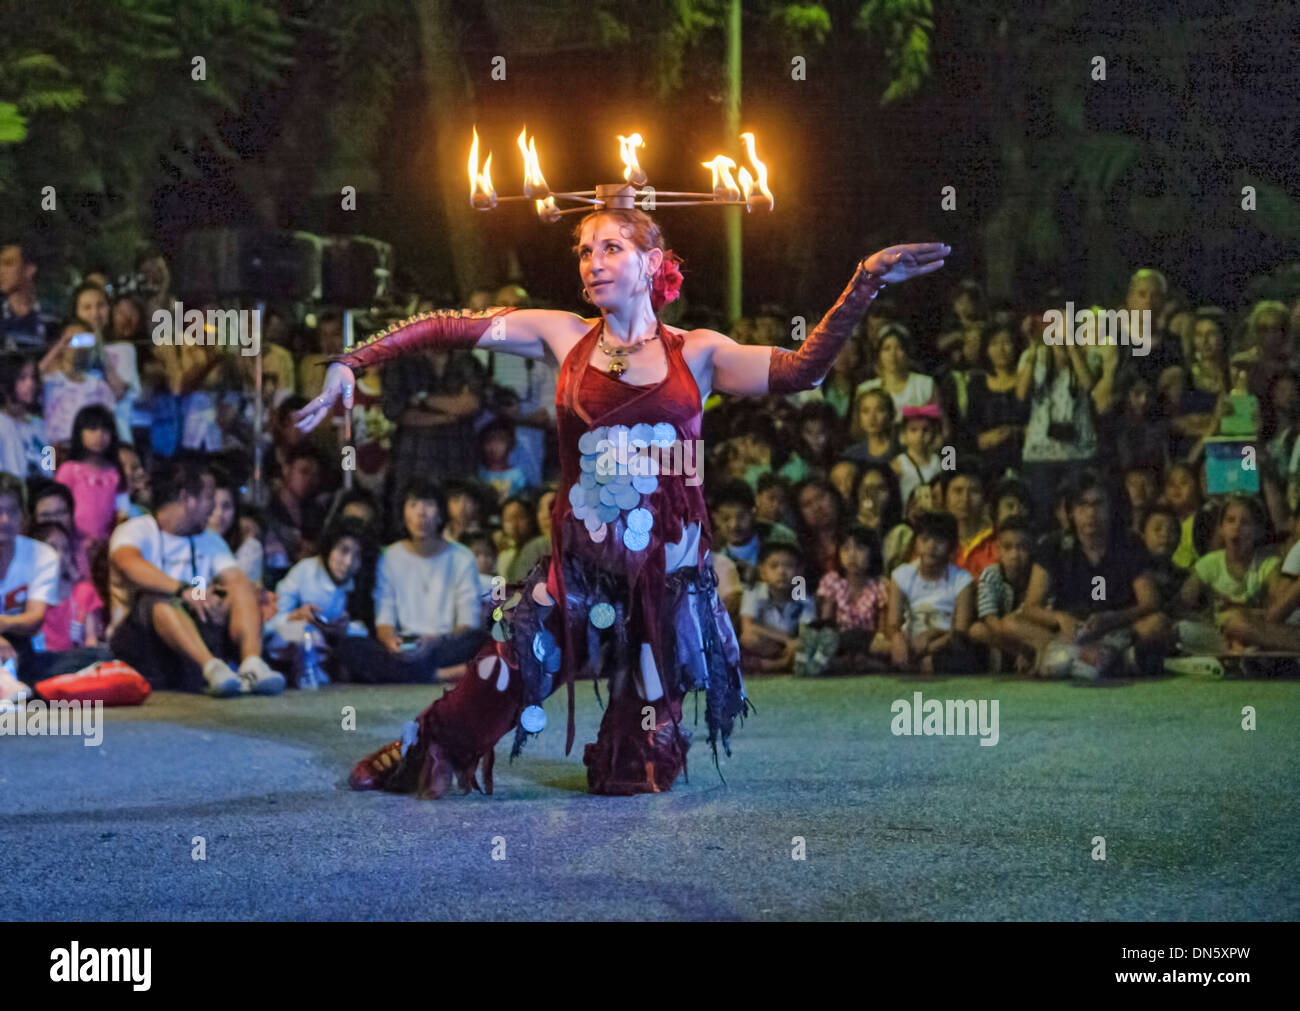 Israeli fire dancer performing at the Street Show in Bangkok, Thailand Stock Photo